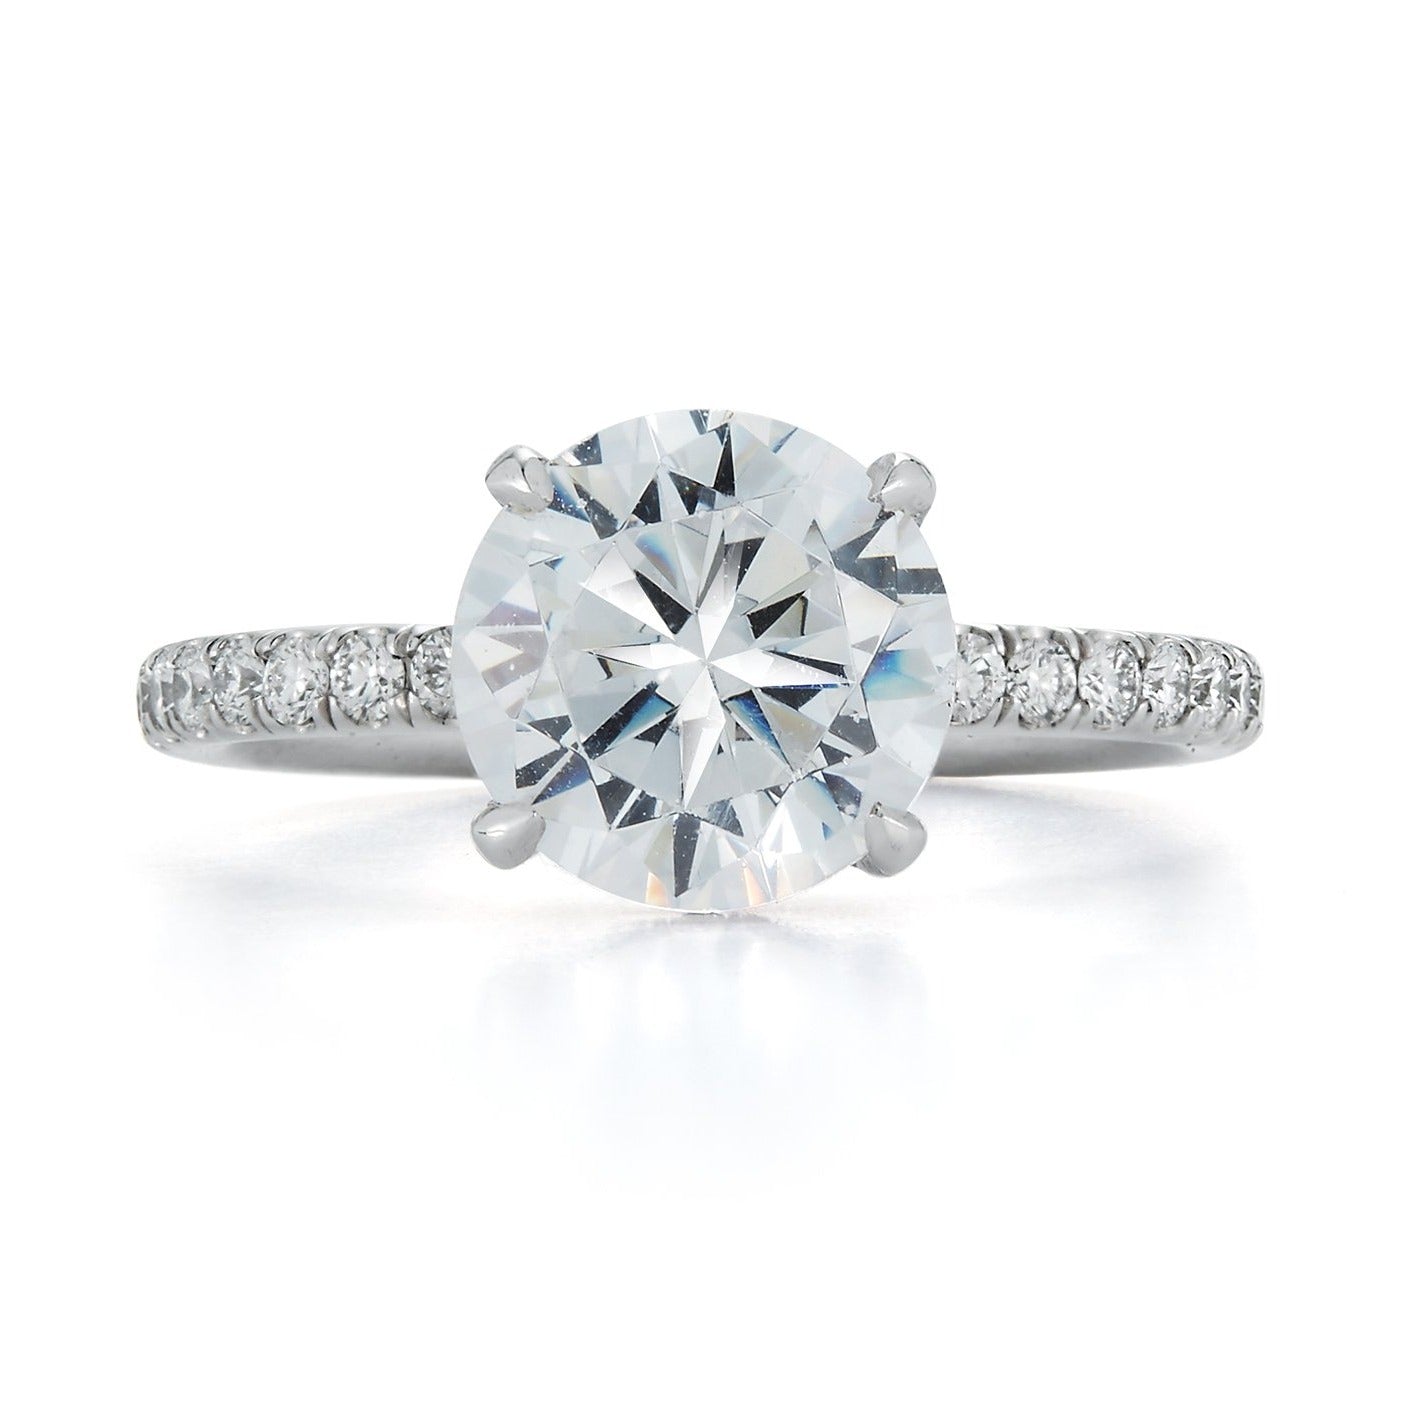 Classic solitaire, halo or pave engagement ring settings?